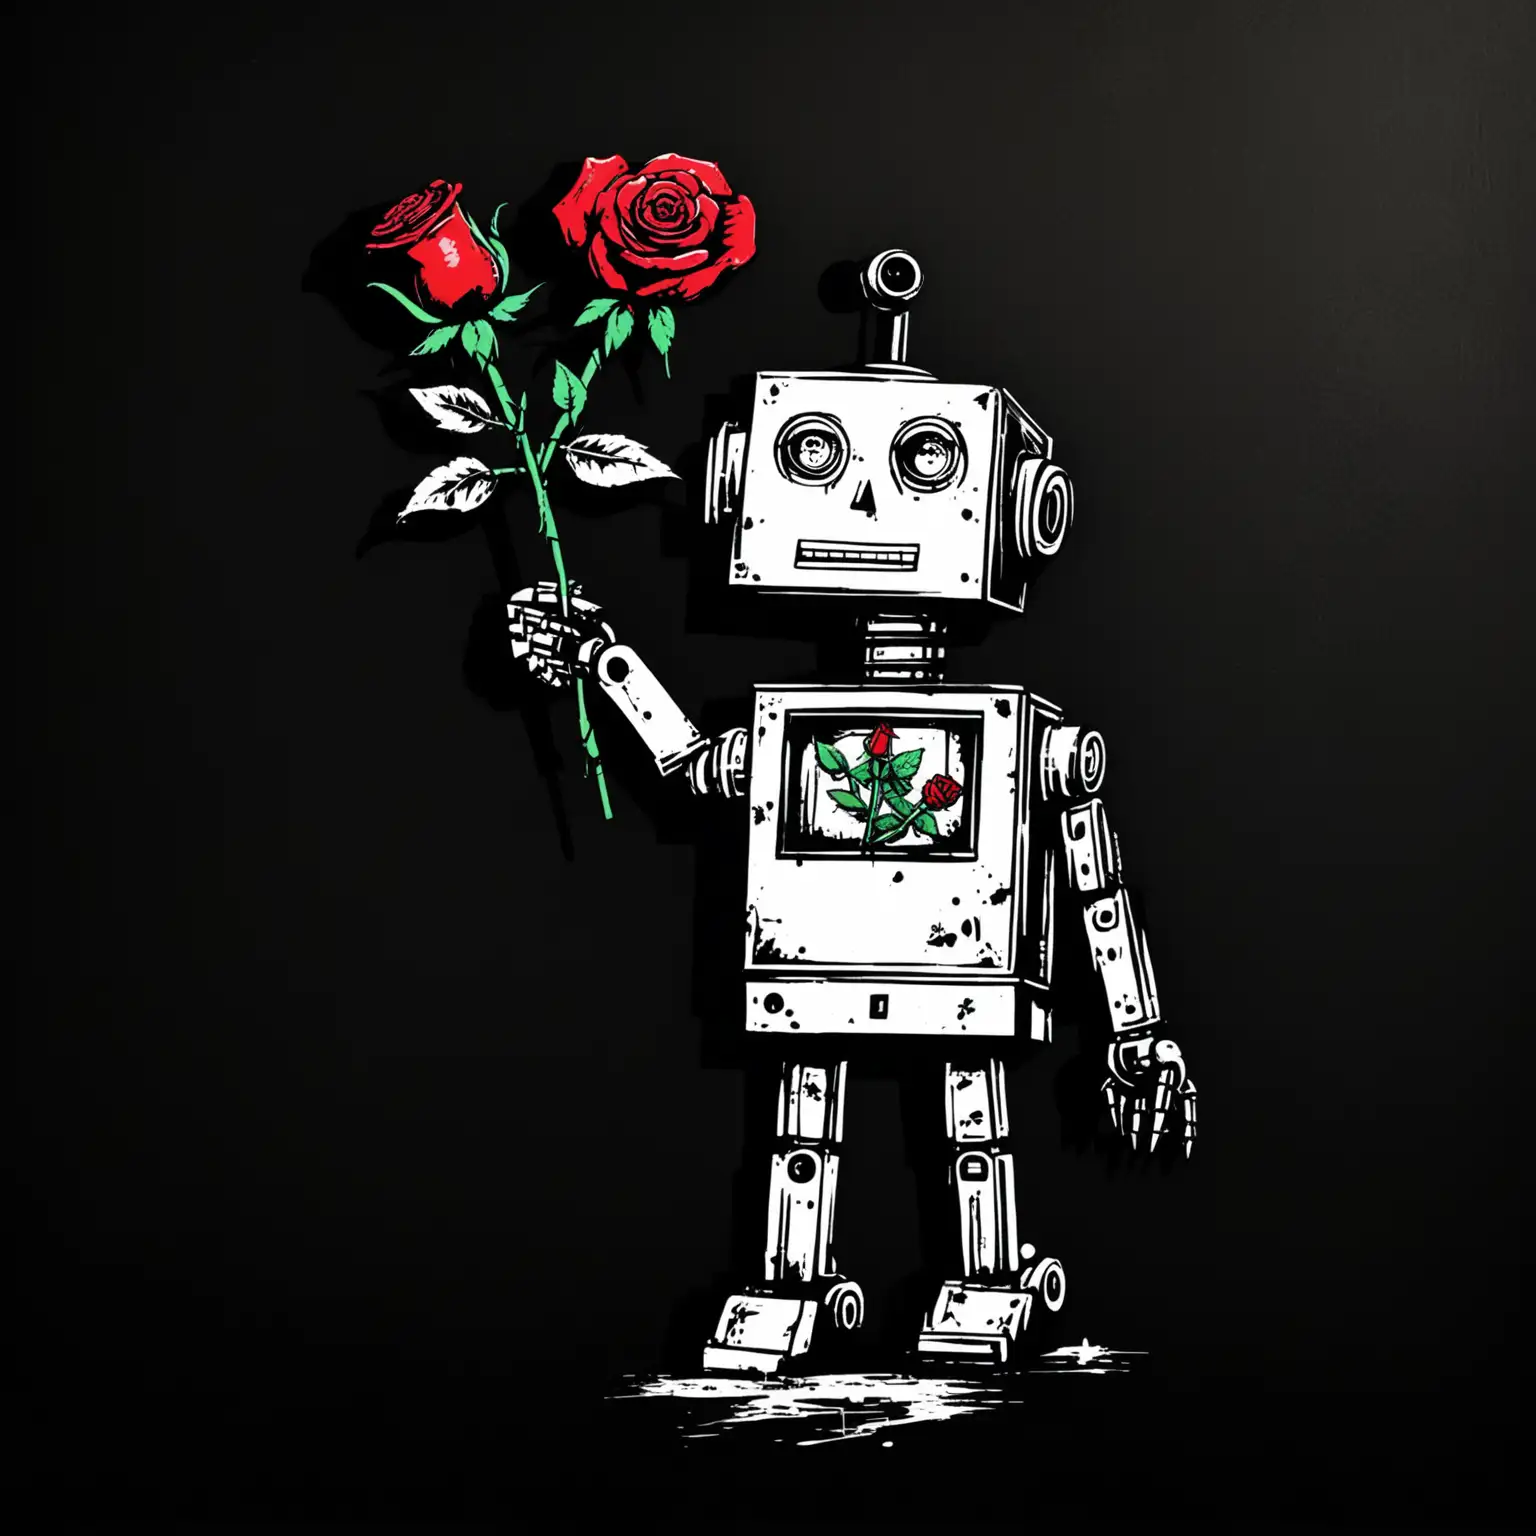 Create a design that is in the style of Banksy street art work. Place it on a flat black background. Include an robbie the robot robot holding a rose in the design.